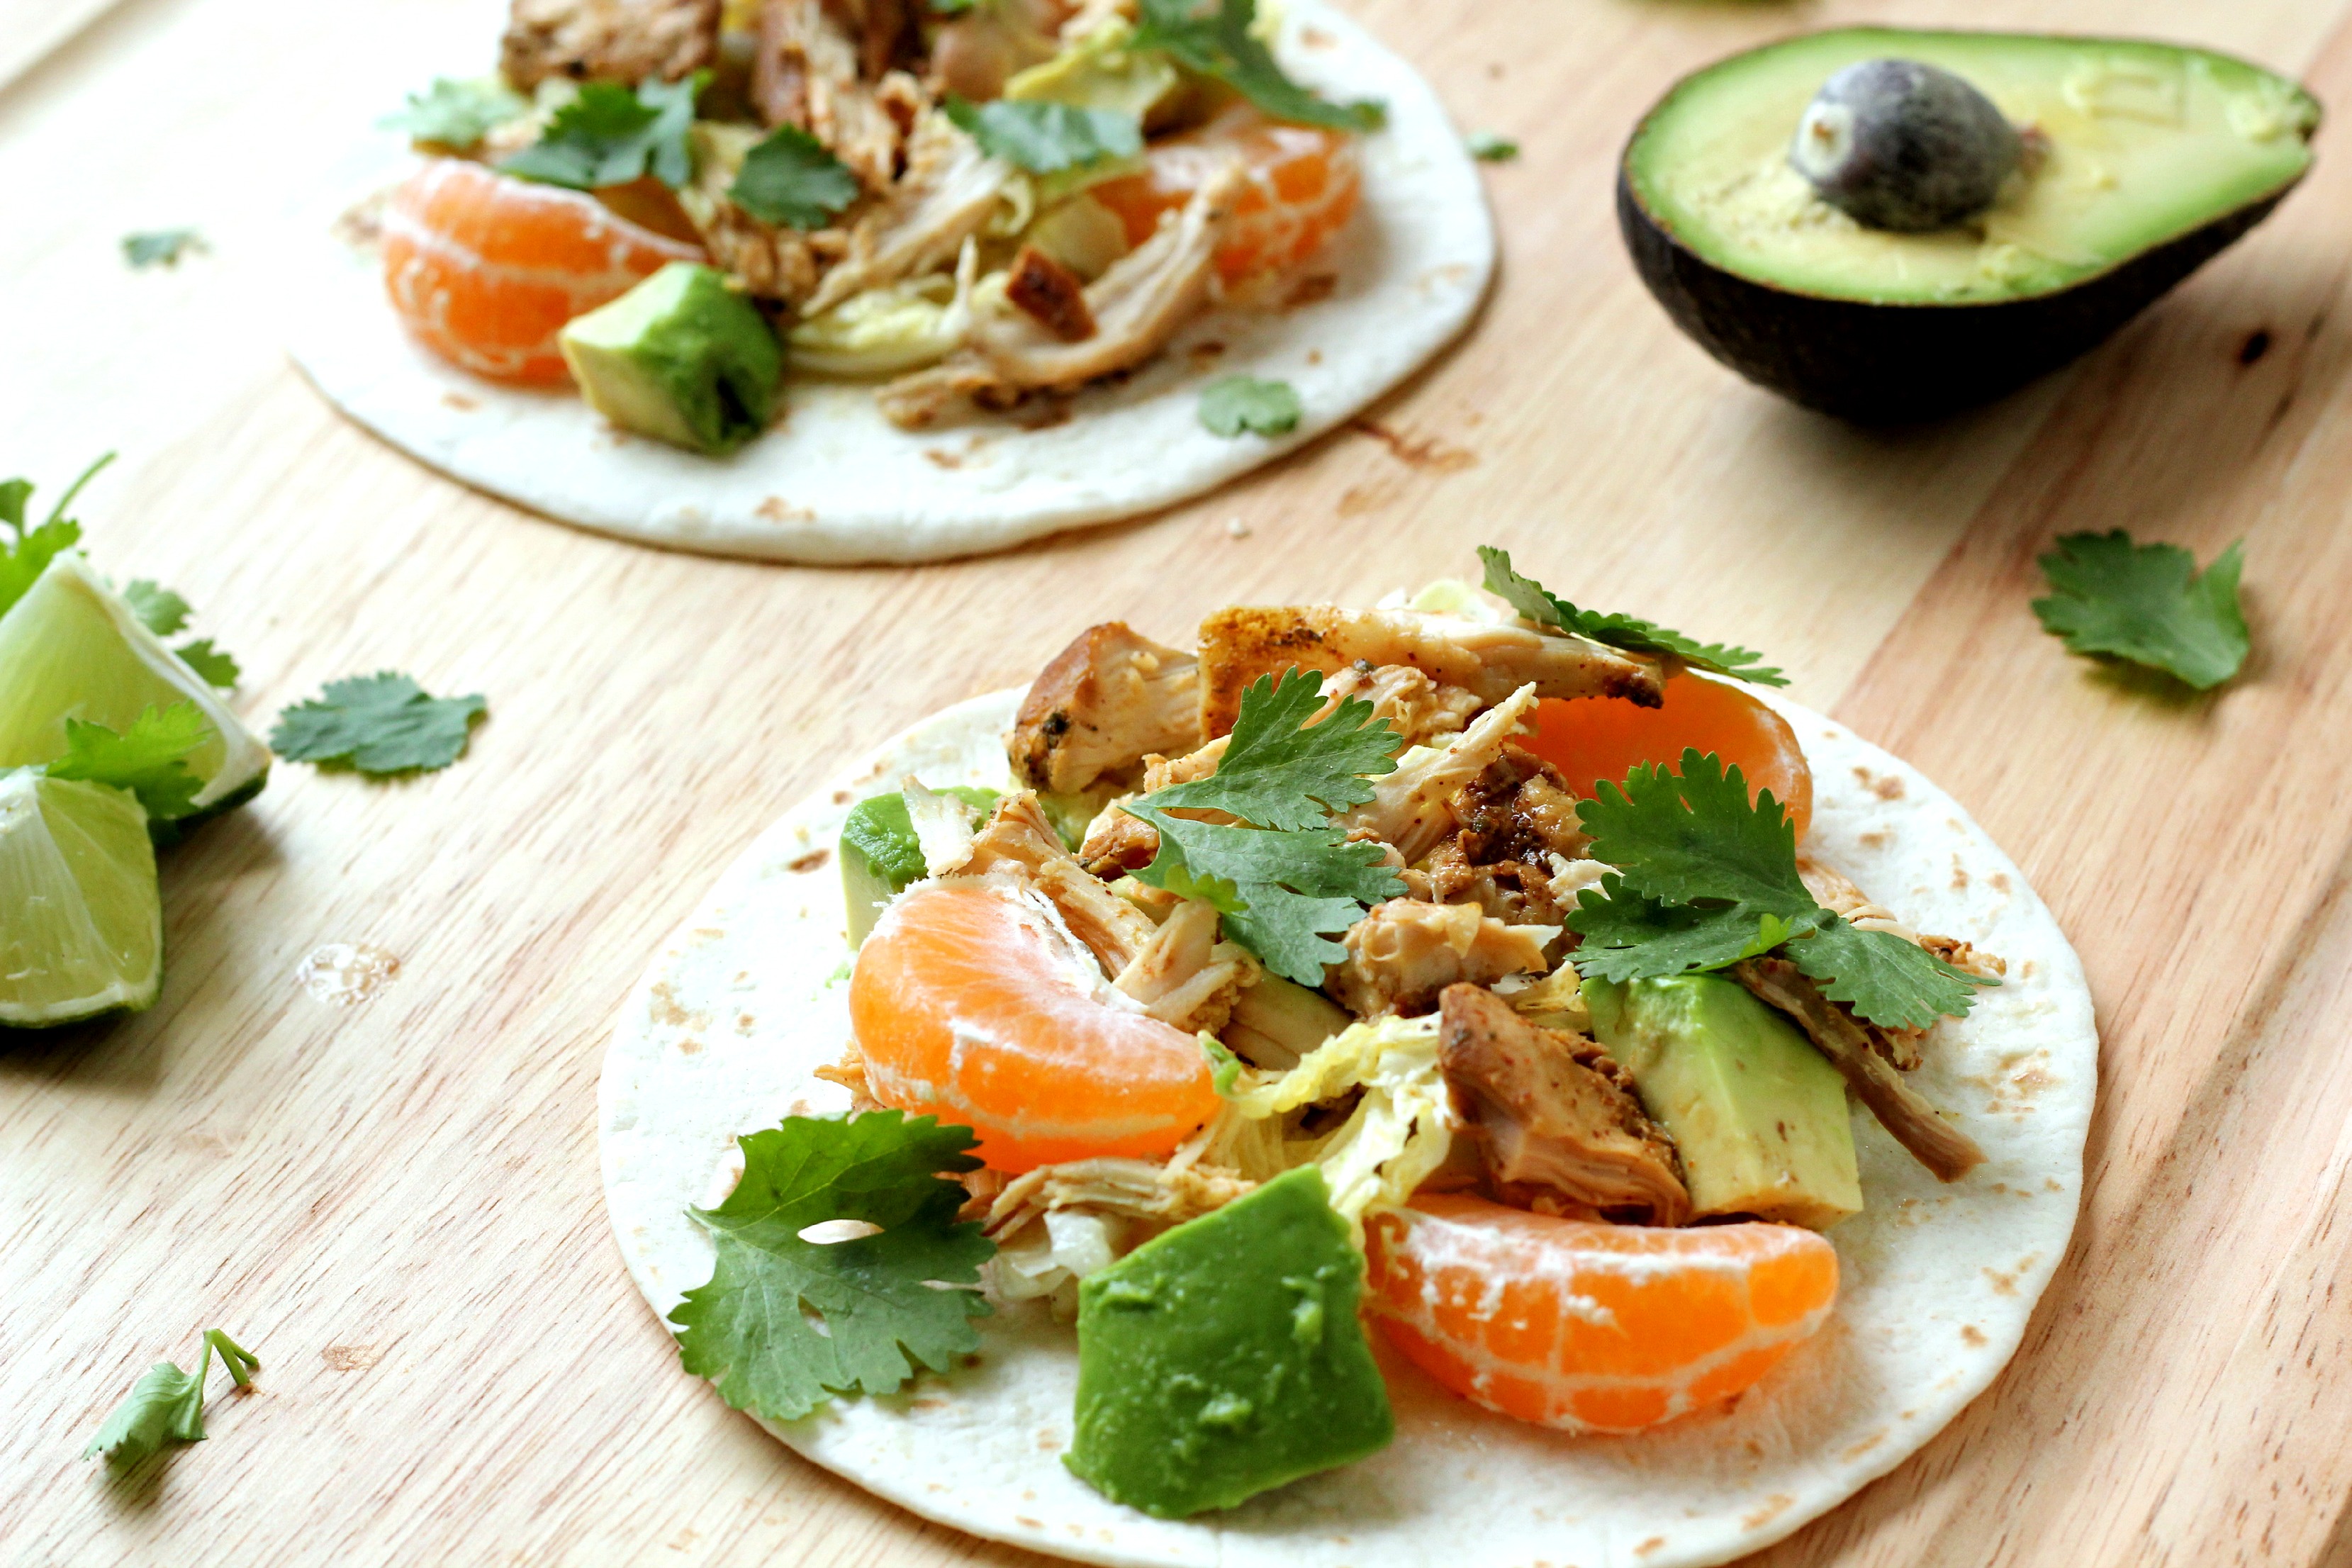 These Crispy Chicken Paleo Tacos are AMAZING! A perfect weeknight meal. 